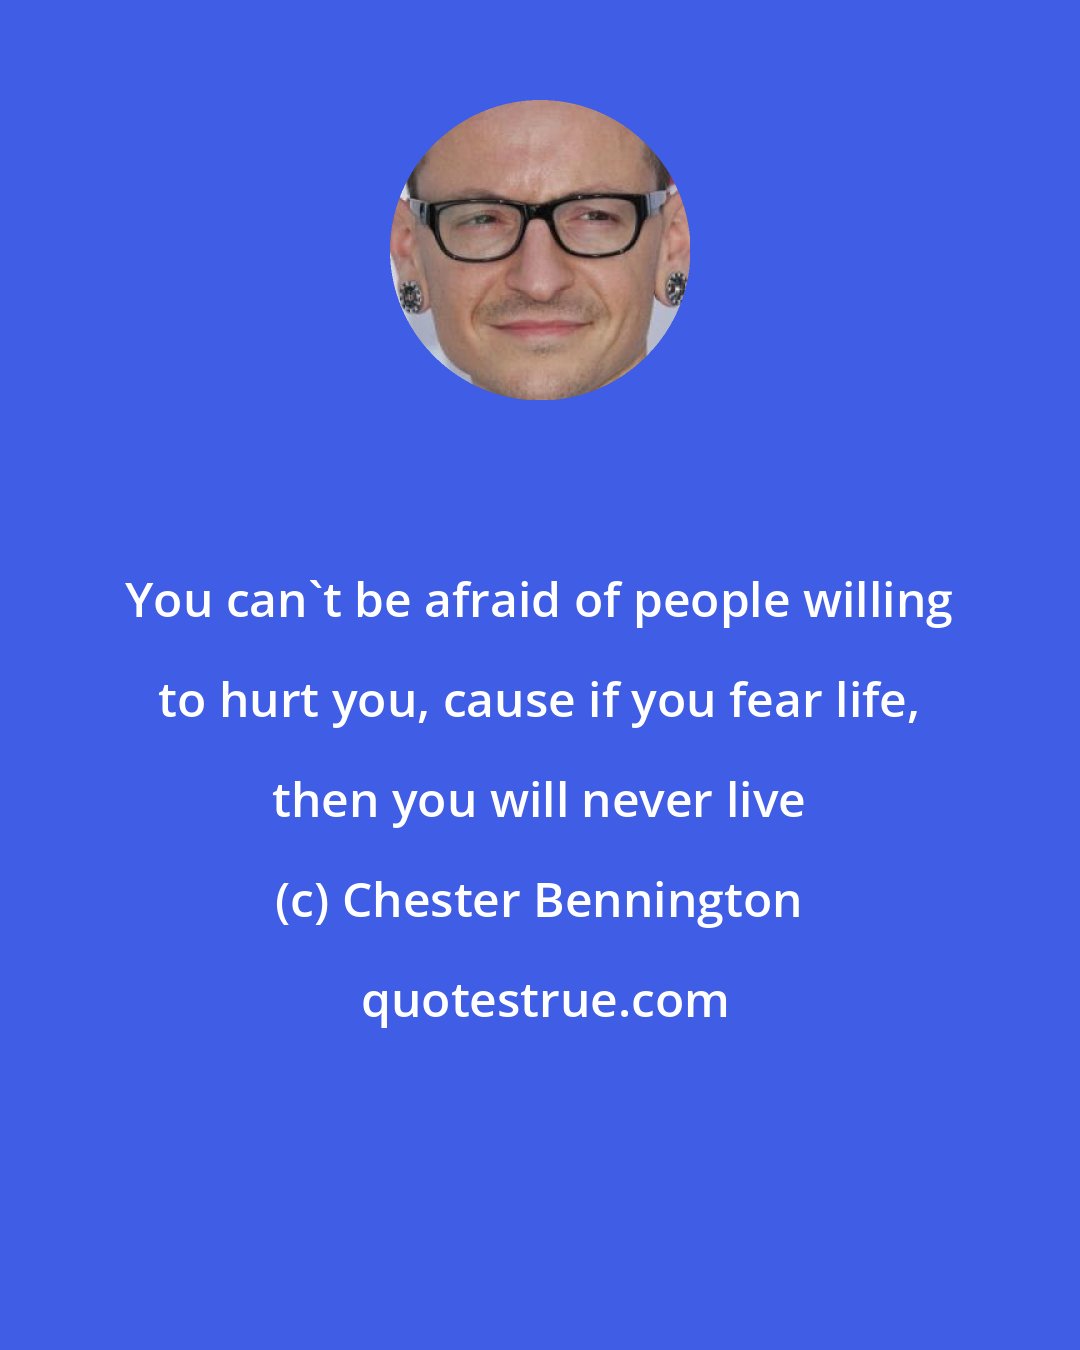 Chester Bennington: You can't be afraid of people willing to hurt you, cause if you fear life, then you will never live